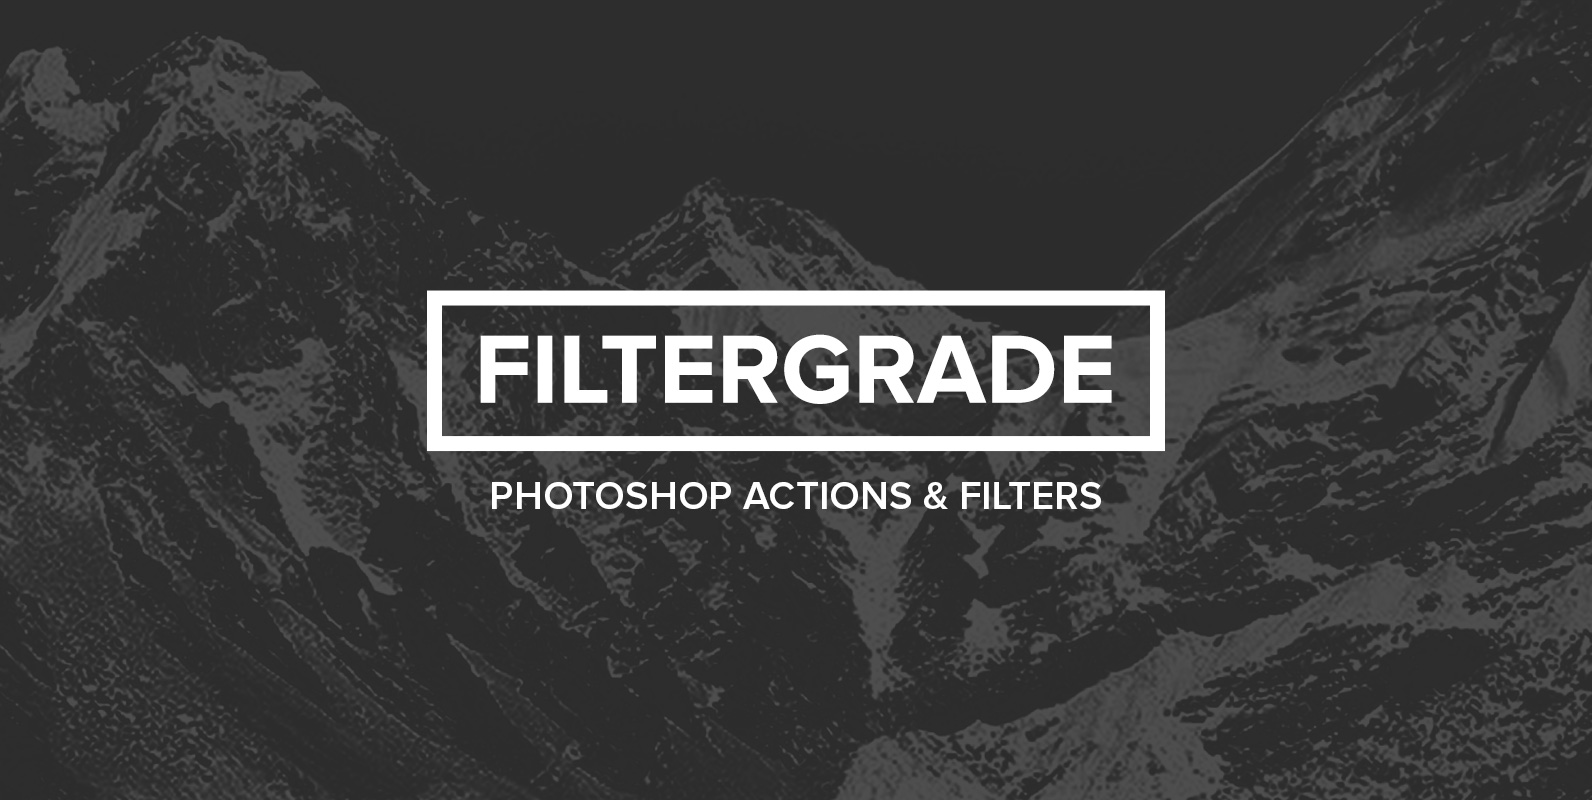 Download Photoshop Actions by Filter Grade